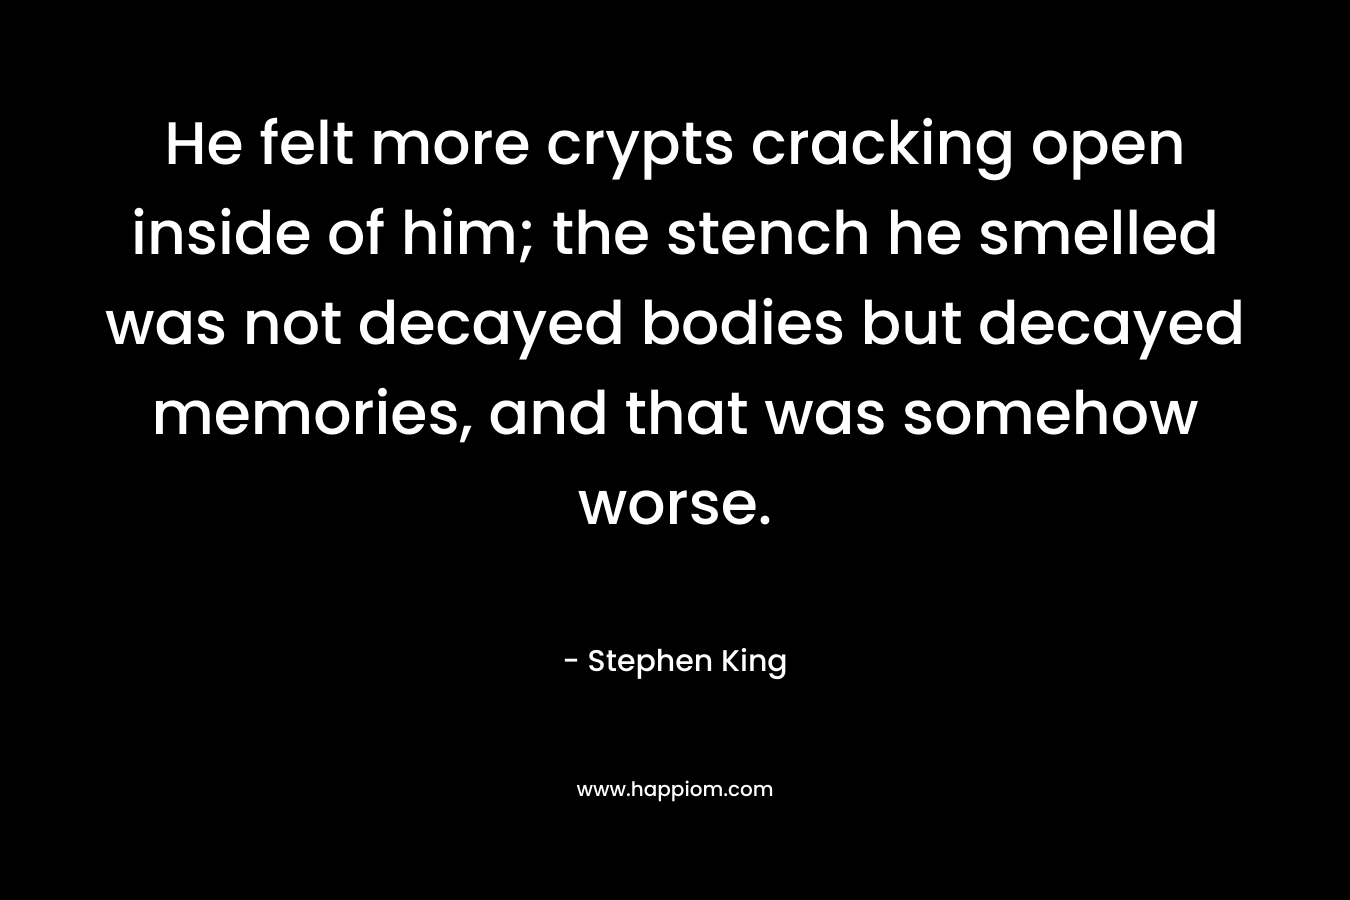 He felt more crypts cracking open inside of him; the stench he smelled was not decayed bodies but decayed memories, and that was somehow worse. – Stephen King